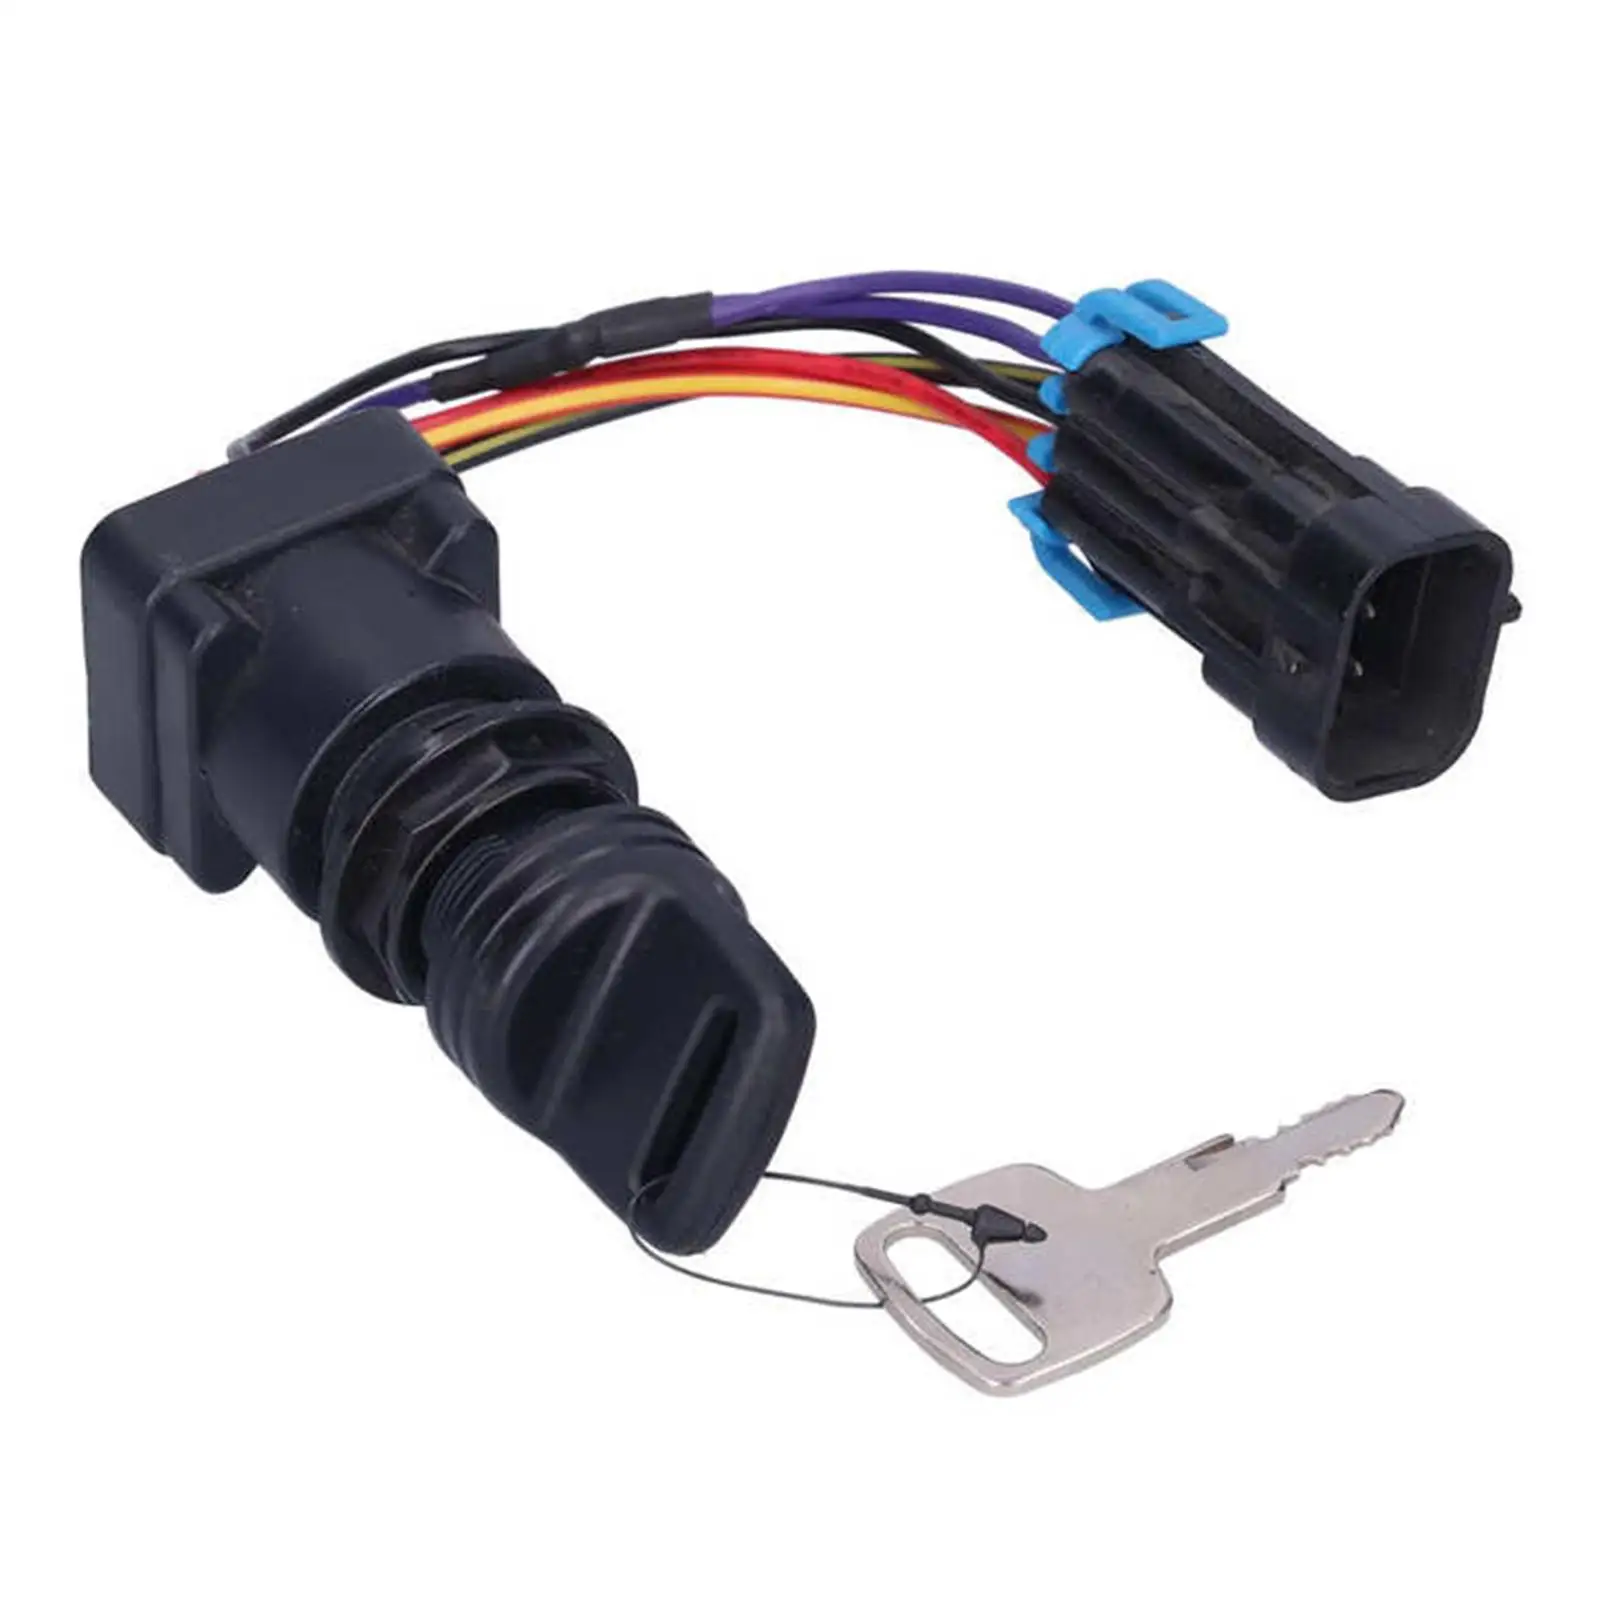 Boat Ignition Key Switch 4 Position Sturdy 893353A03 for Mercury DTS Outboard Motor Control Box Repair Replacement Assembly